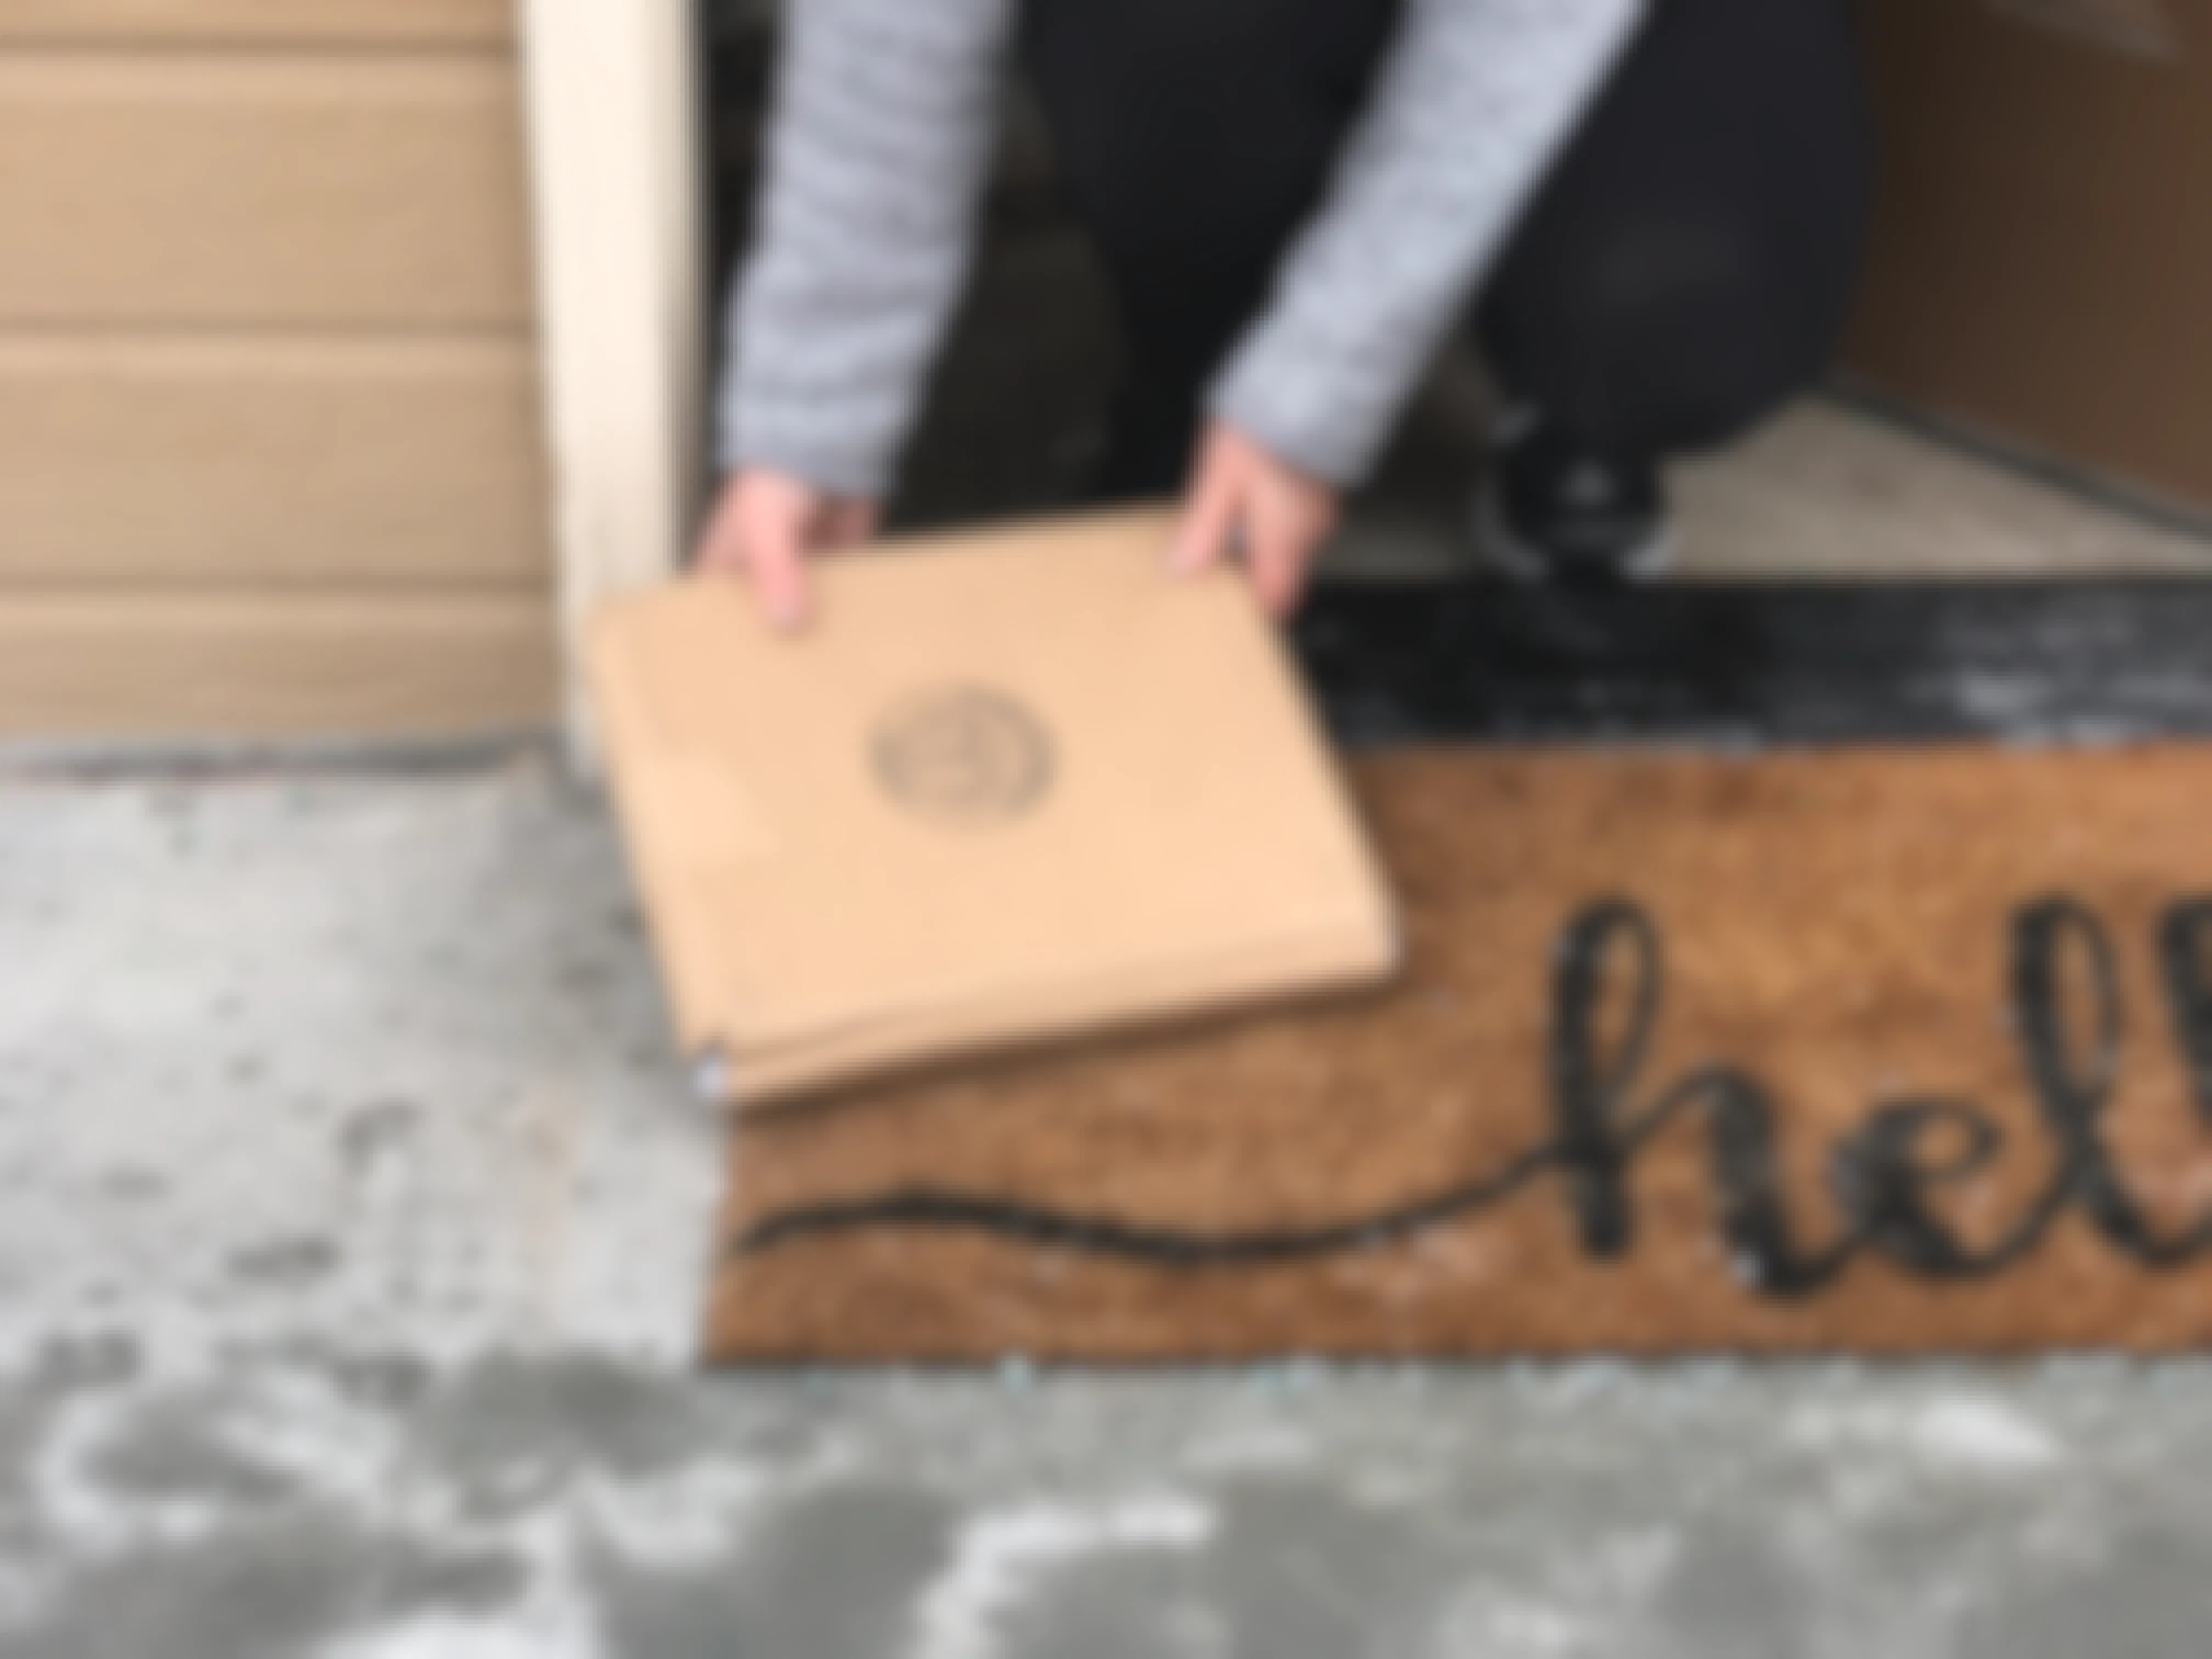 Woman picking up a package left at her doorstep